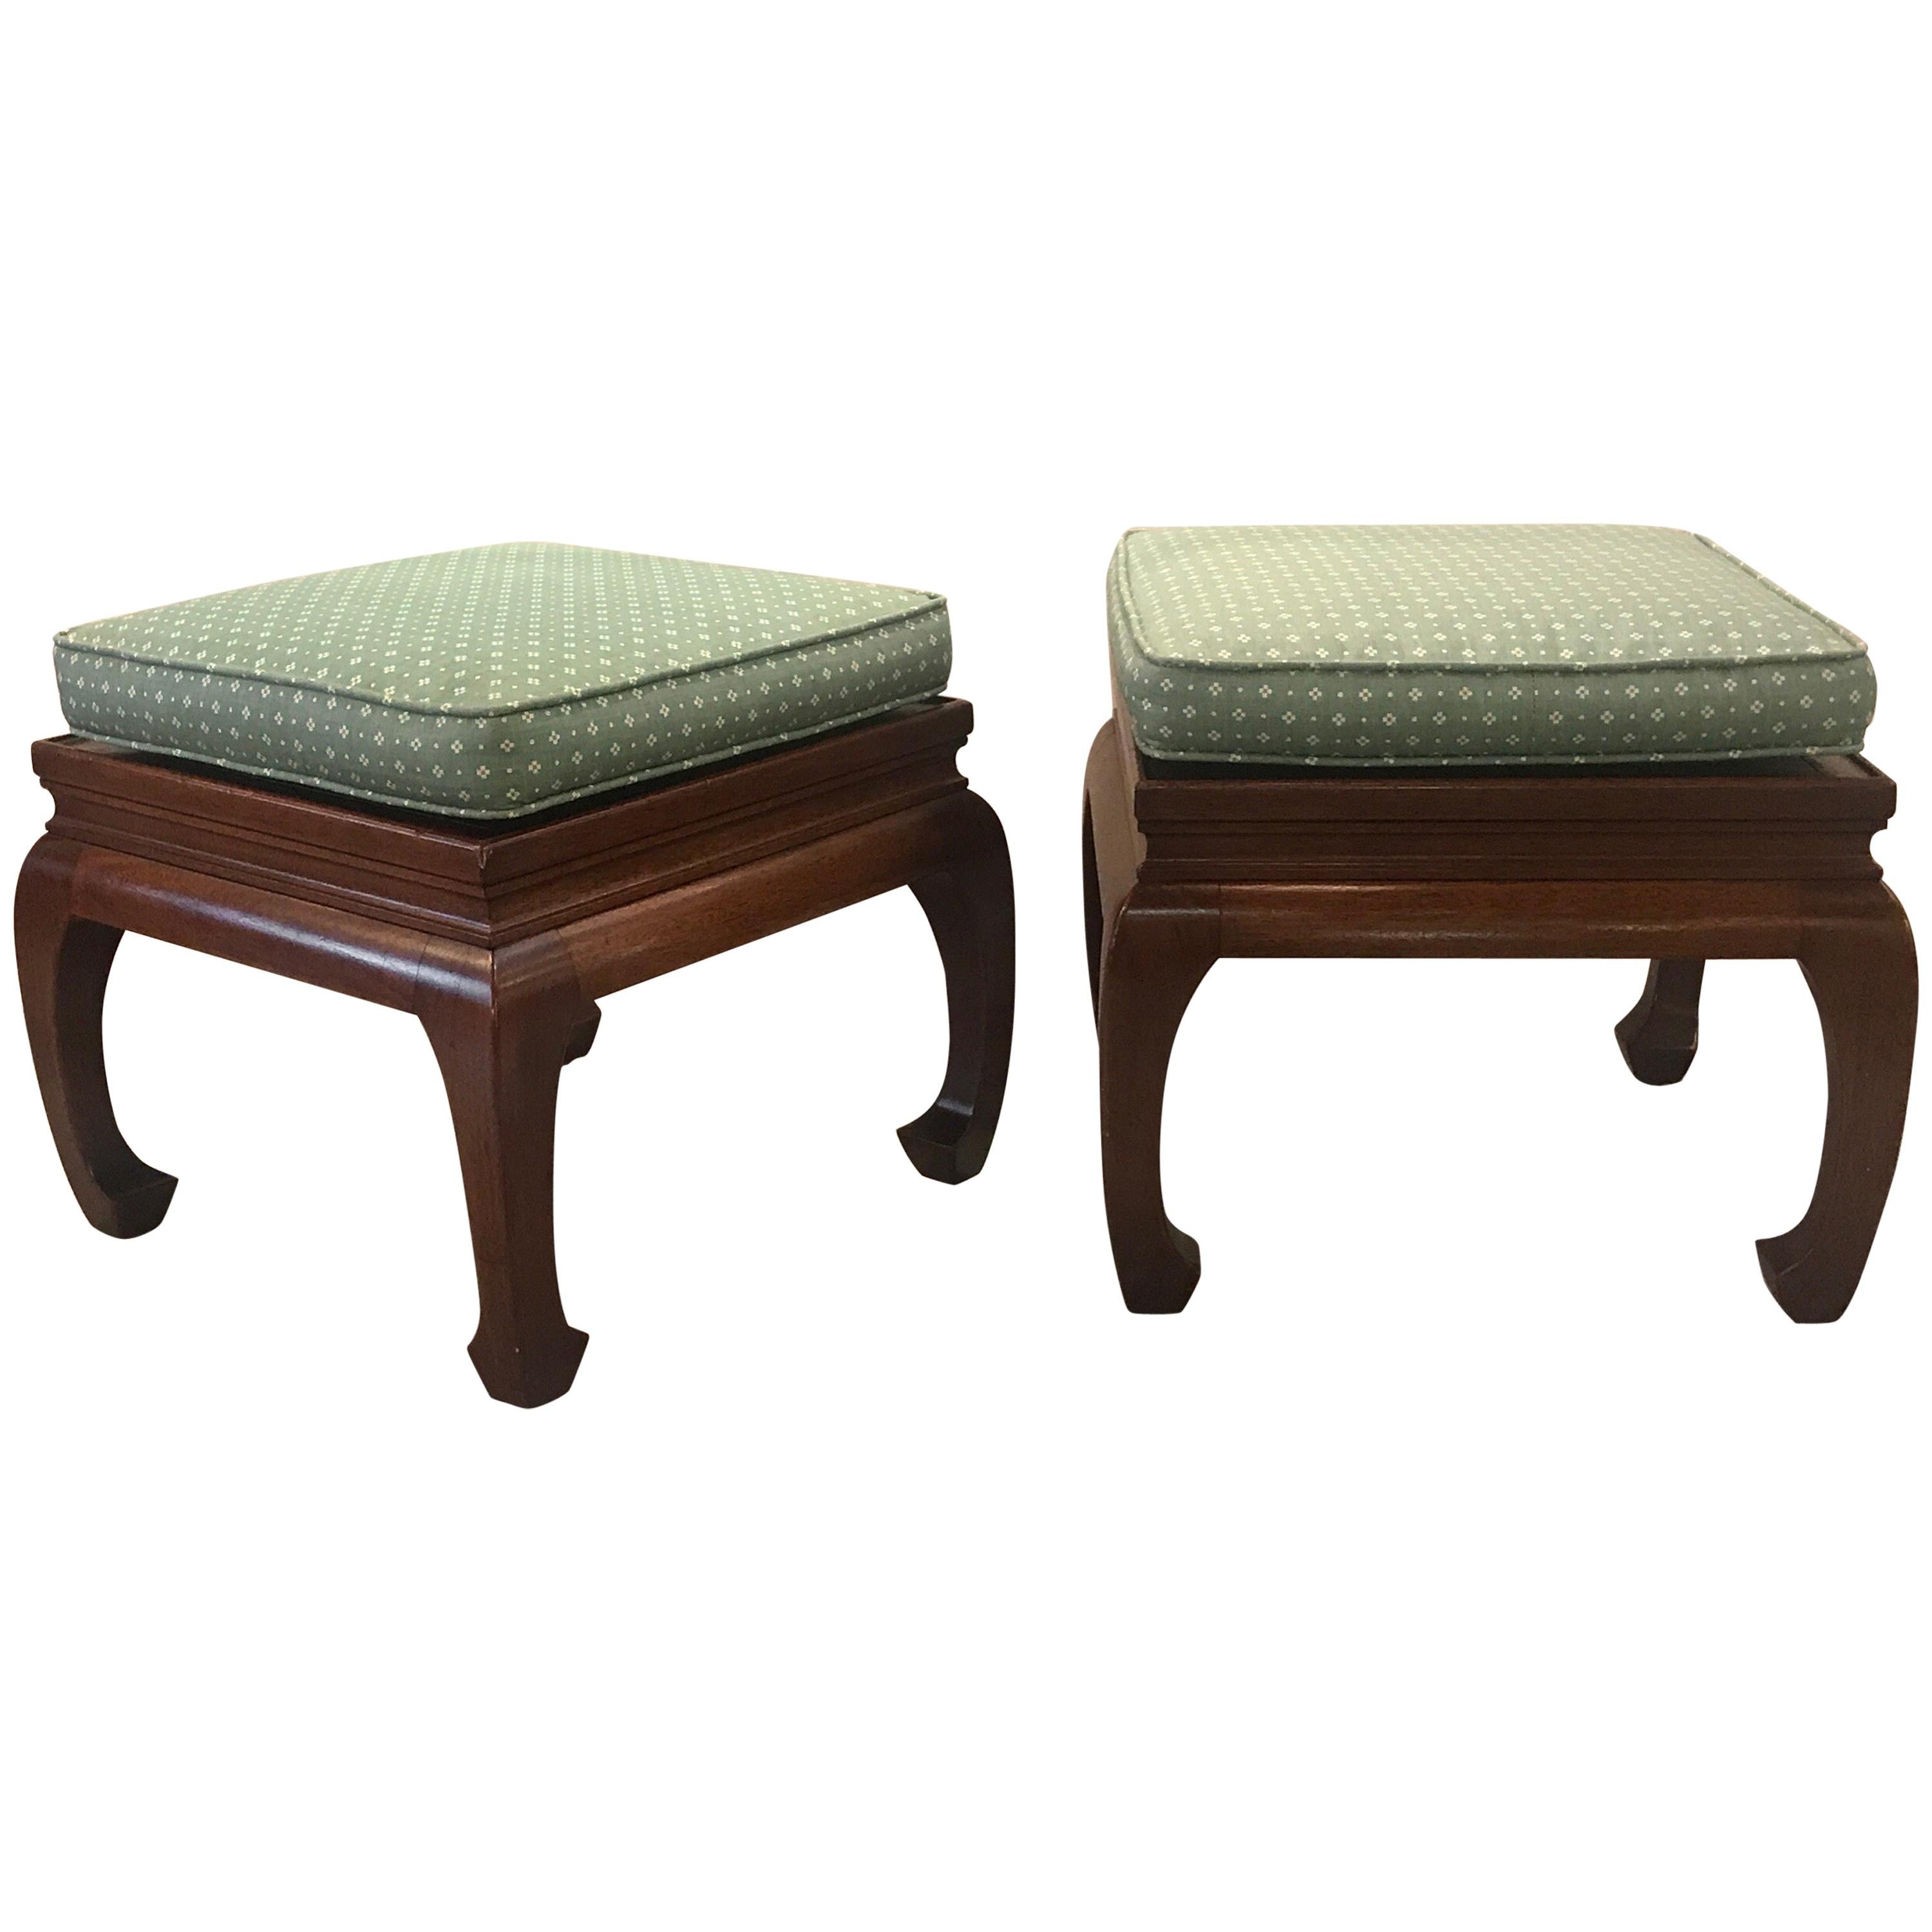 Pair of Asian Style Benches or Stands